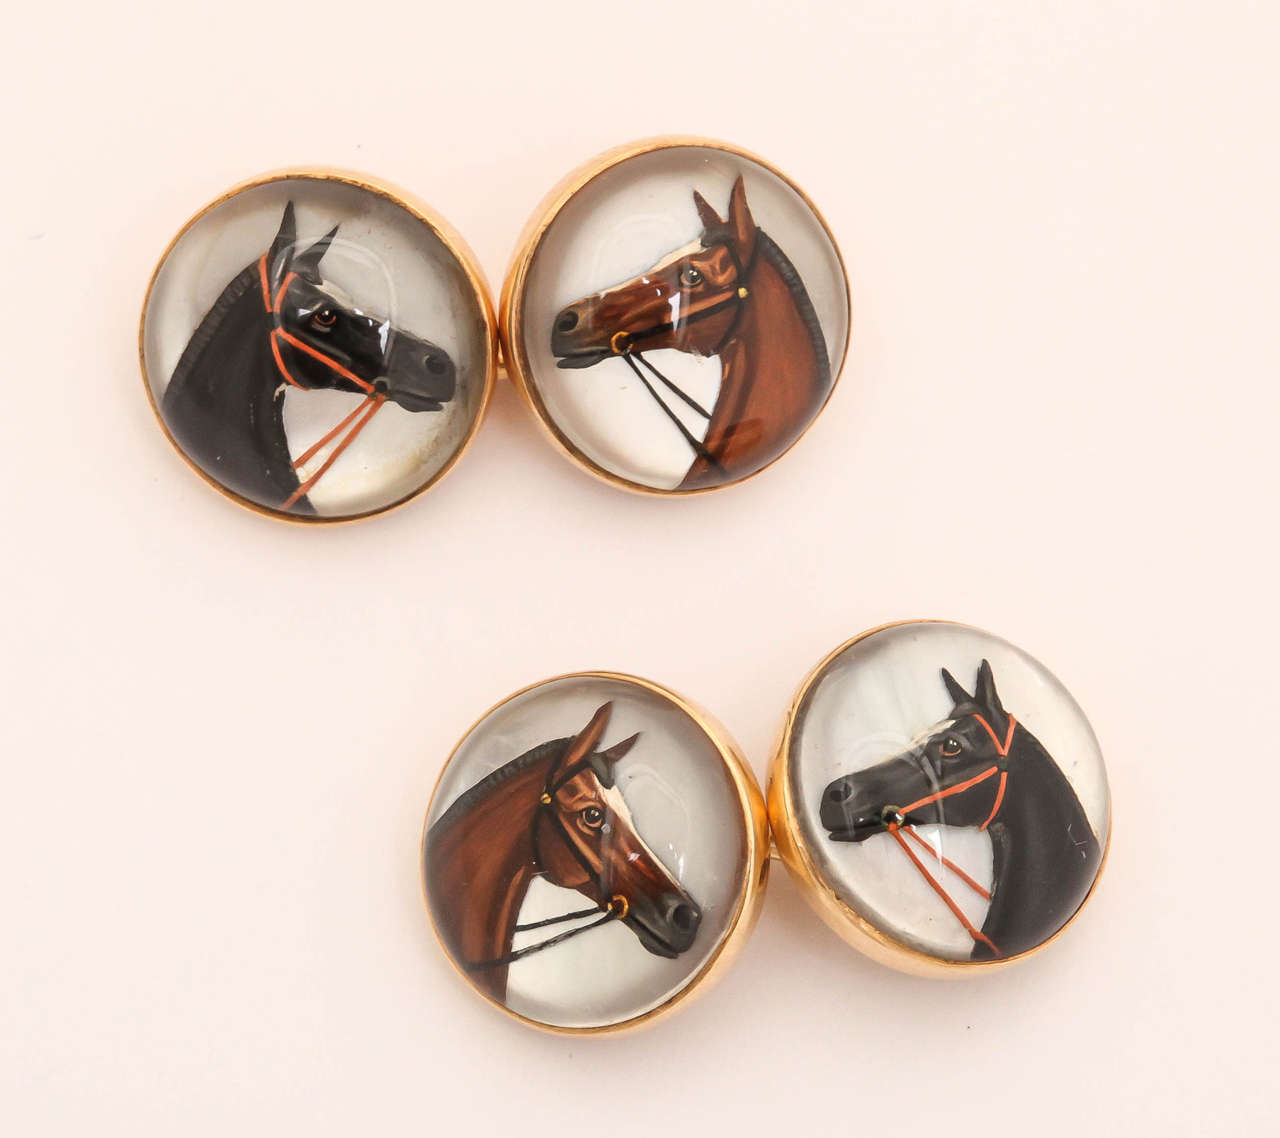 Fabulous pair of 14 carat yellow gold horse Essex, or reverse intaglio cufflinks.

Very beautifully detailed and painted horses.